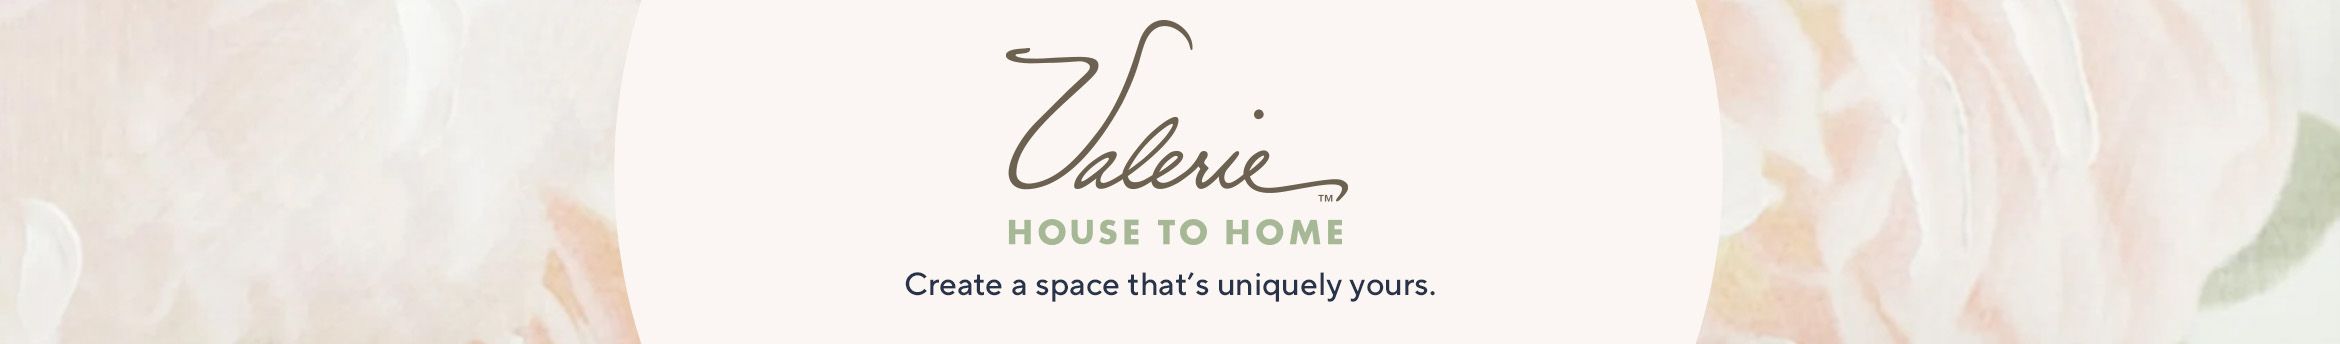 Valerie House to Home.  Create a space that's uniquely yours.